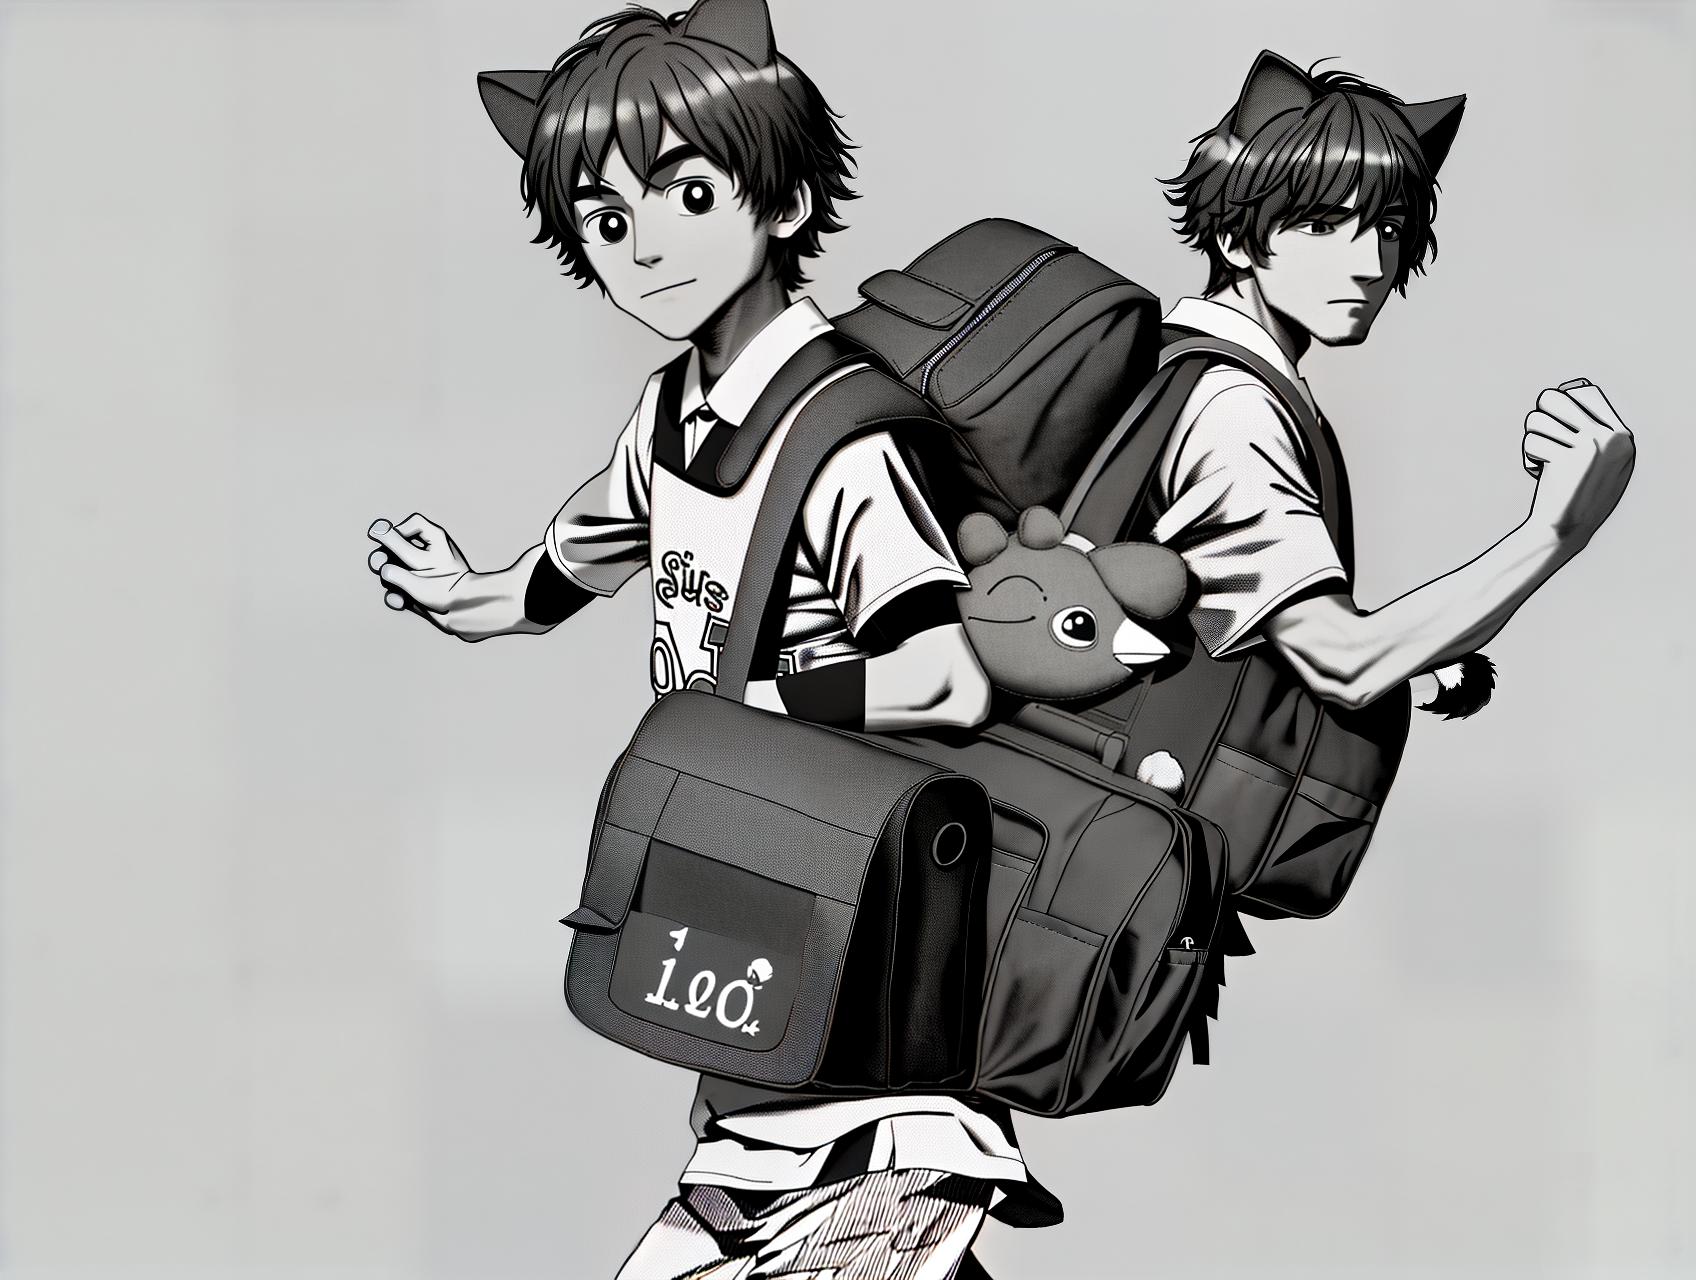  mascot, best quality, an animal mascot, wearing a short-sleeved T-shirt with the number 10 on it, carrying a schoolbag